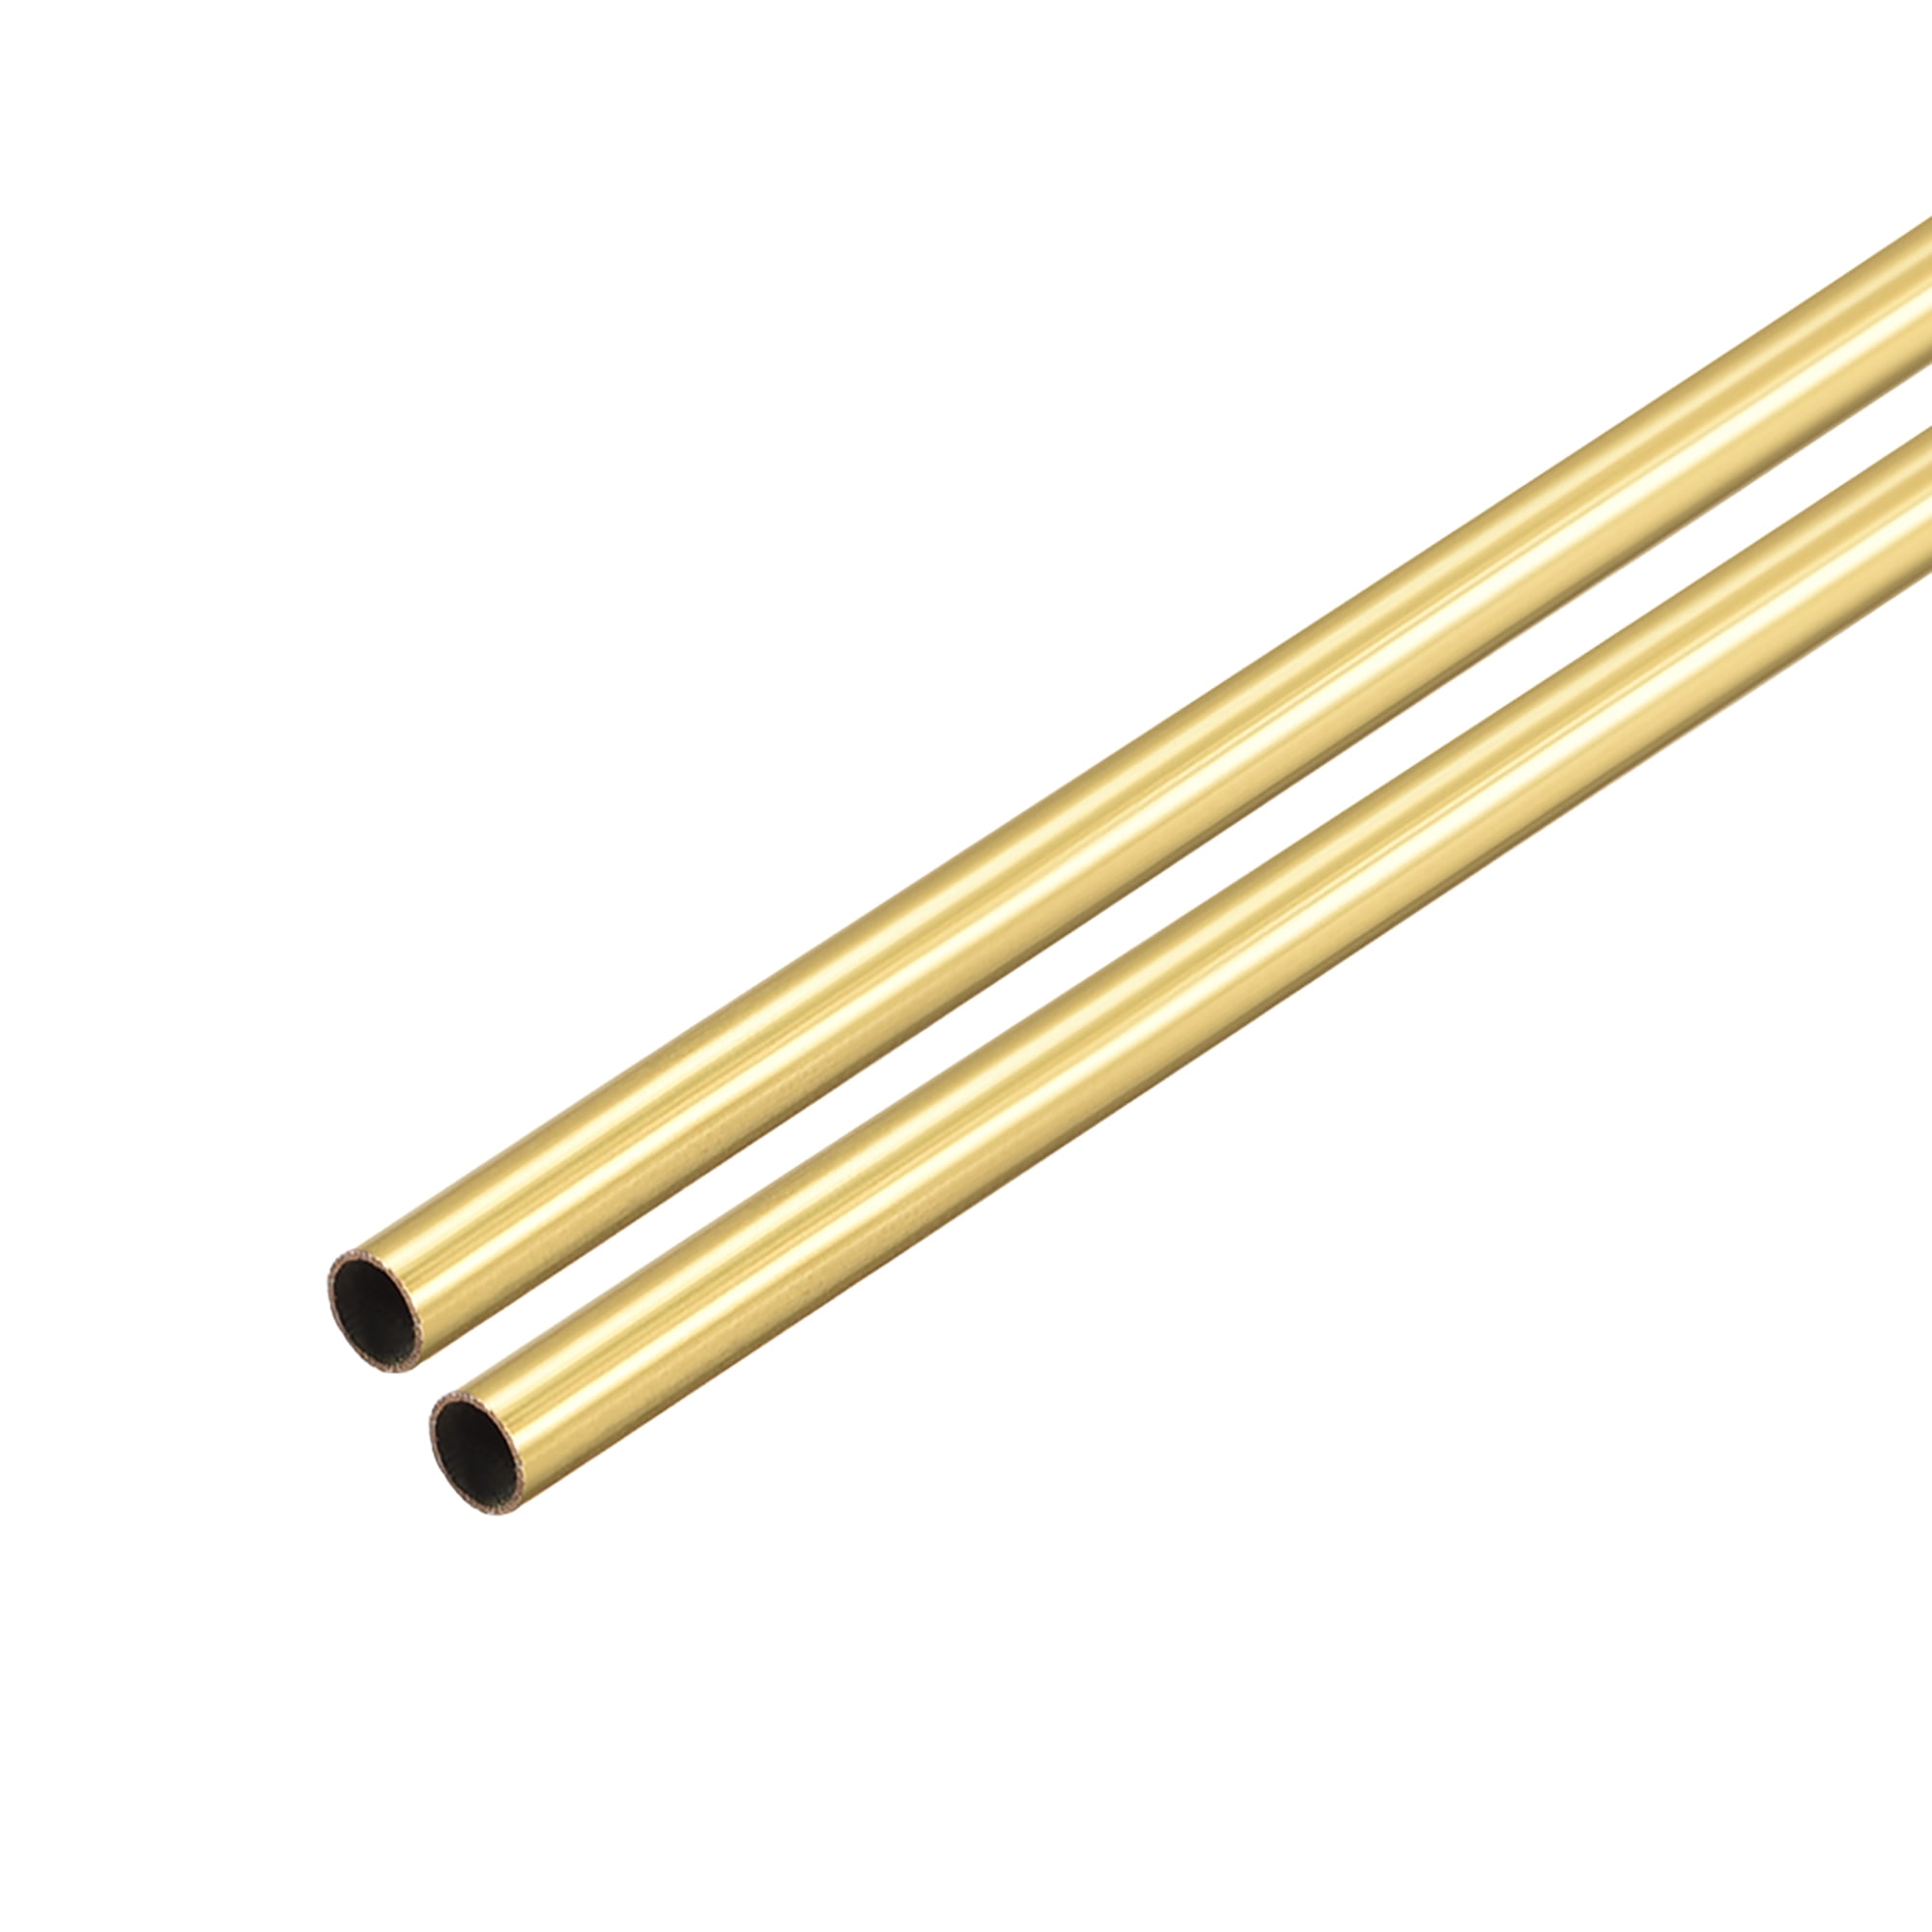 Brass Round Tube 2.5mm OD 0.2mm Wall Thickness 300mm Length Seamless 2.5 Mm Od Tubing